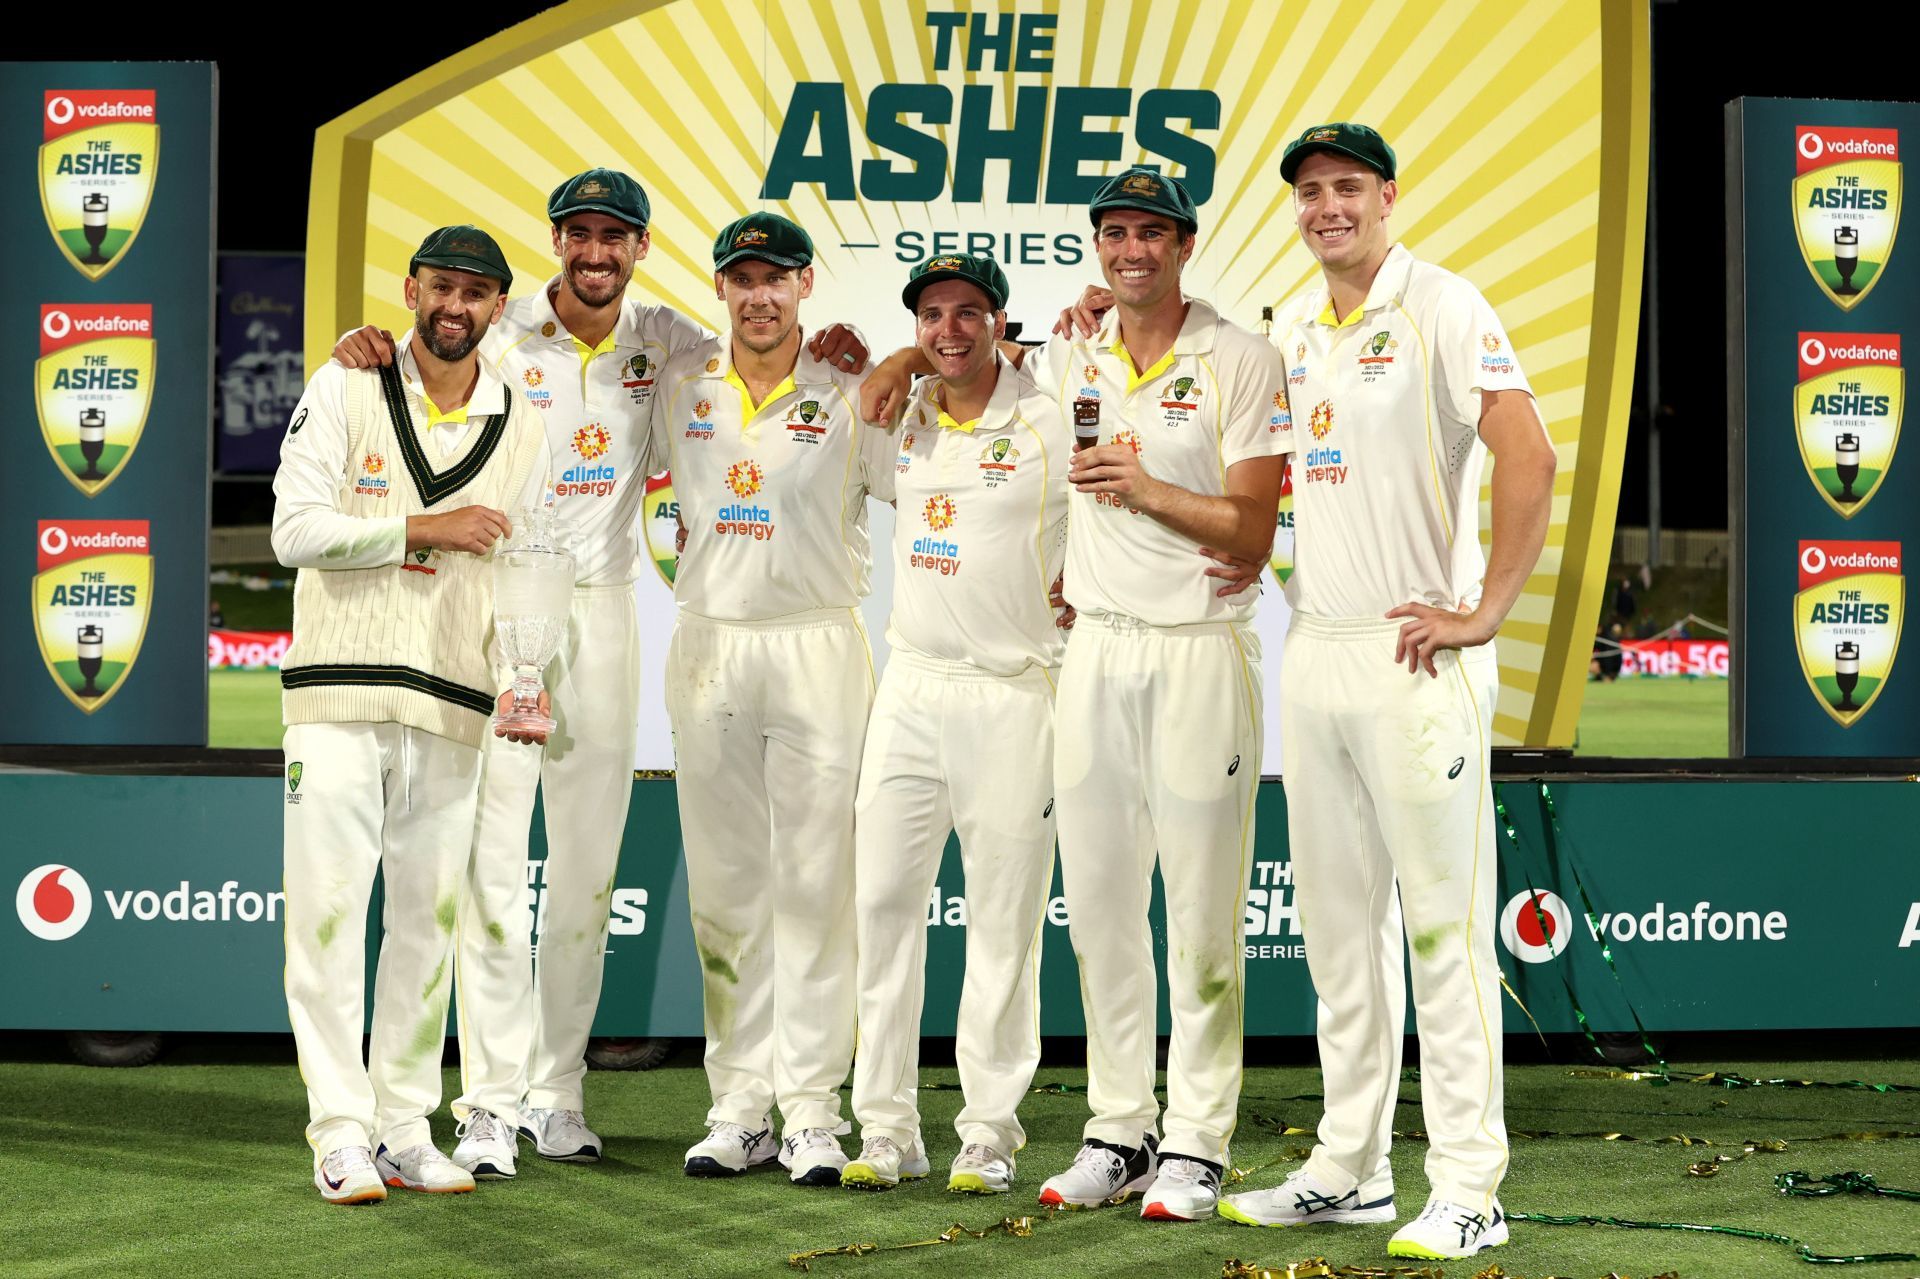 Australia are coming off a comprehensive win over England in the Ashes series